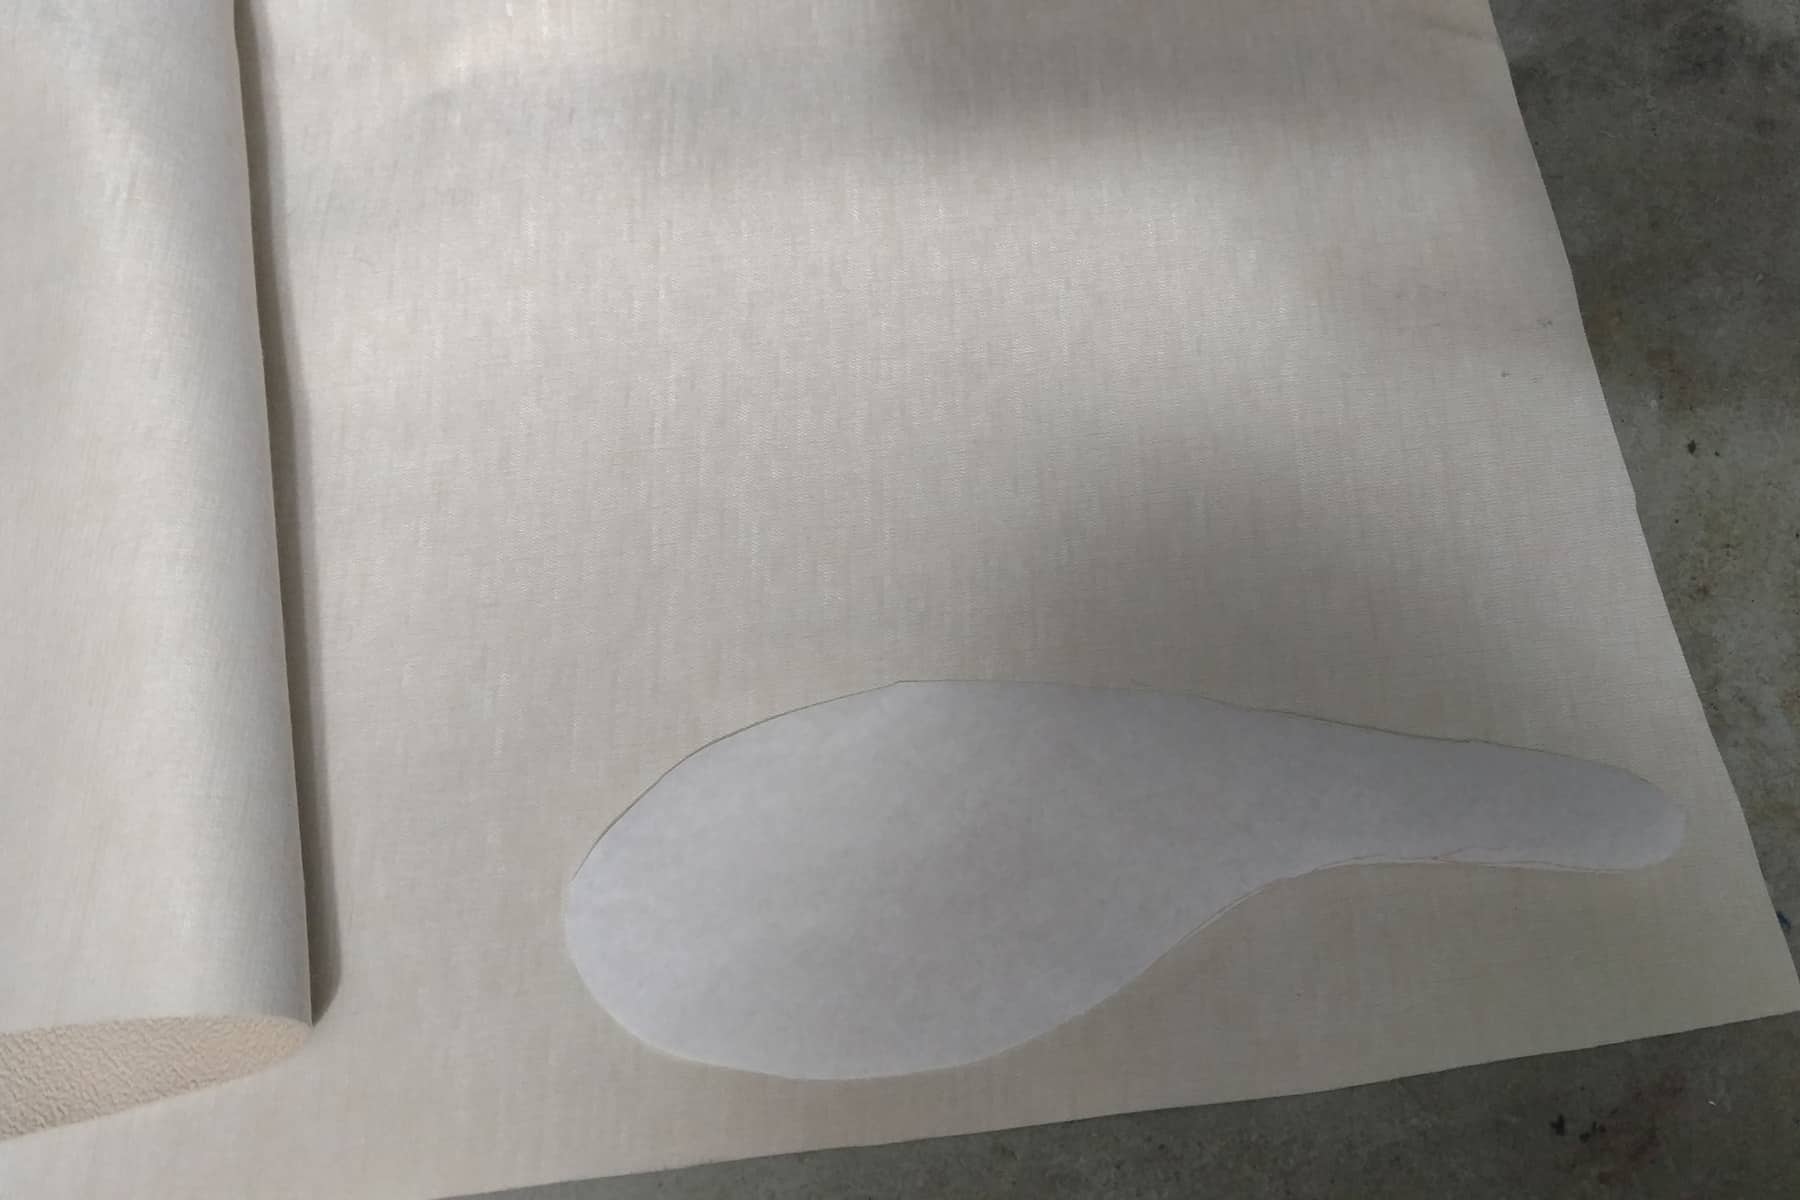 A shoe sole shaped paper pattern is laid against the underside of a piece of soling fabric.